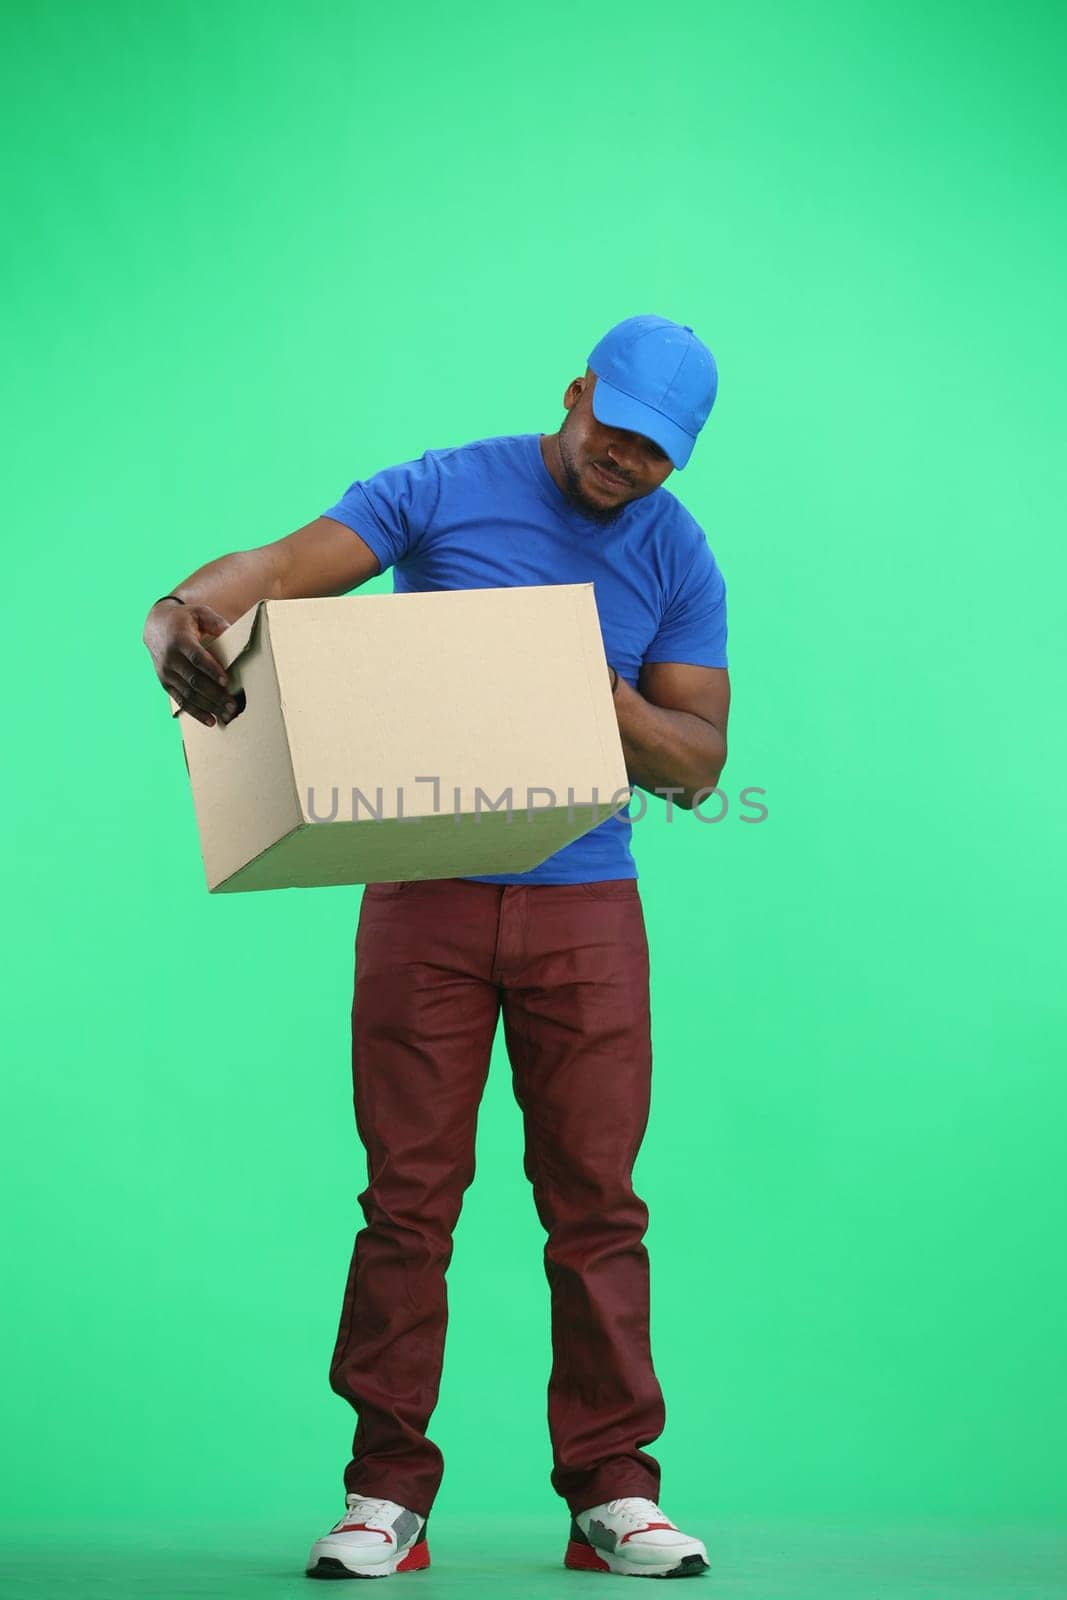 The deliveryman, in full height, on a green background, looks at the box by Prosto